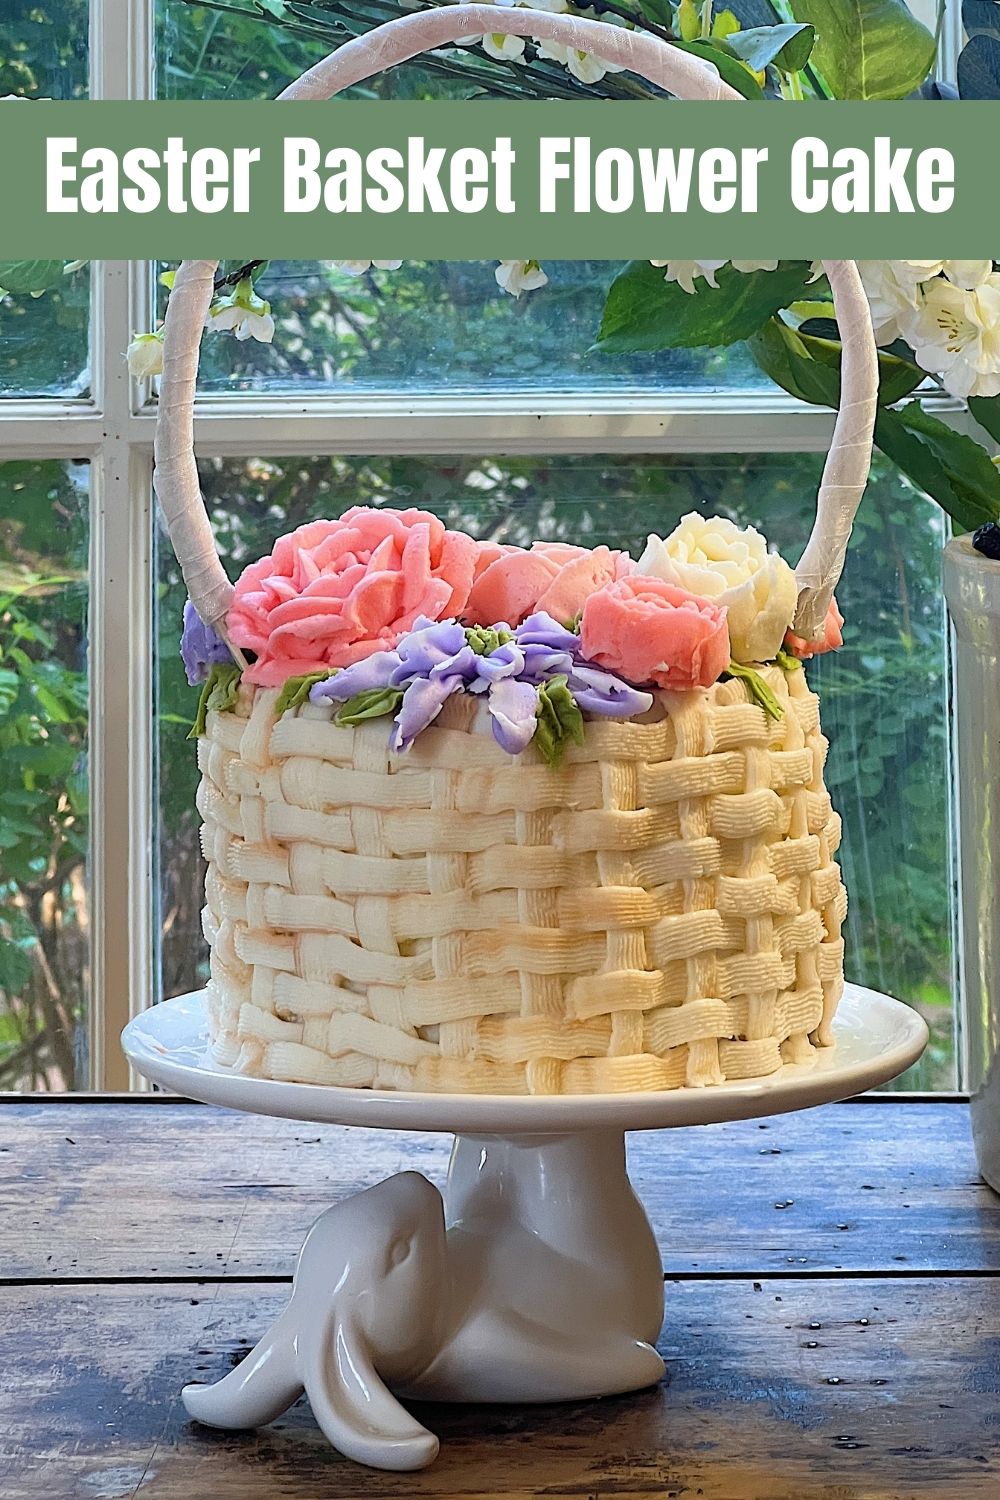 Yes, you read that correctly. Easter basket flower cake. Are you looking for a stunning centerpiece for your Easter table? This is it!